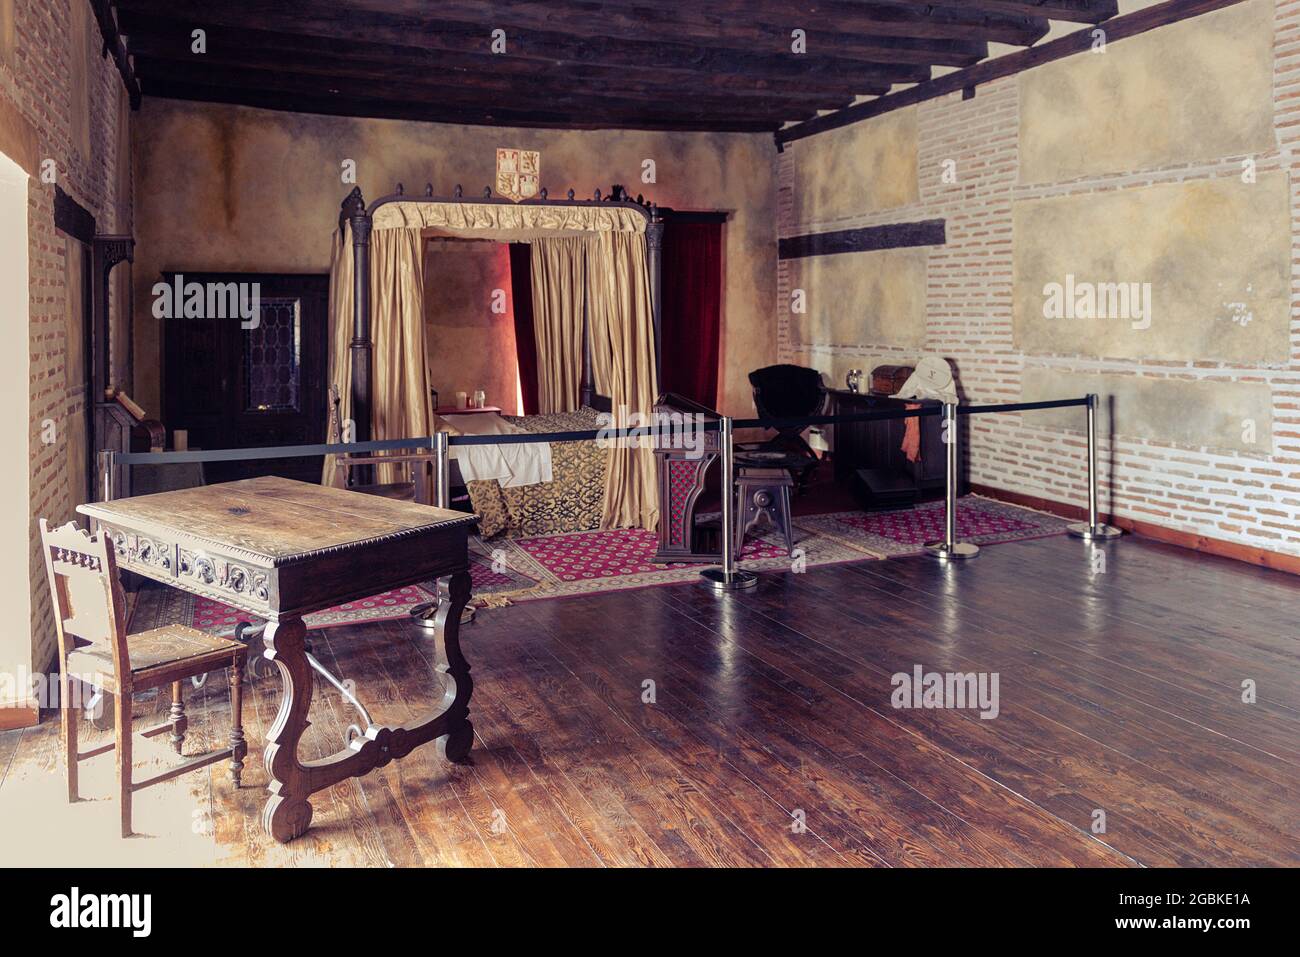 Medina del Campo, Valladolid, Spain; July 23, 2021: Reproduction of Elizabeth I's room in the palace where she died. Stock Photo